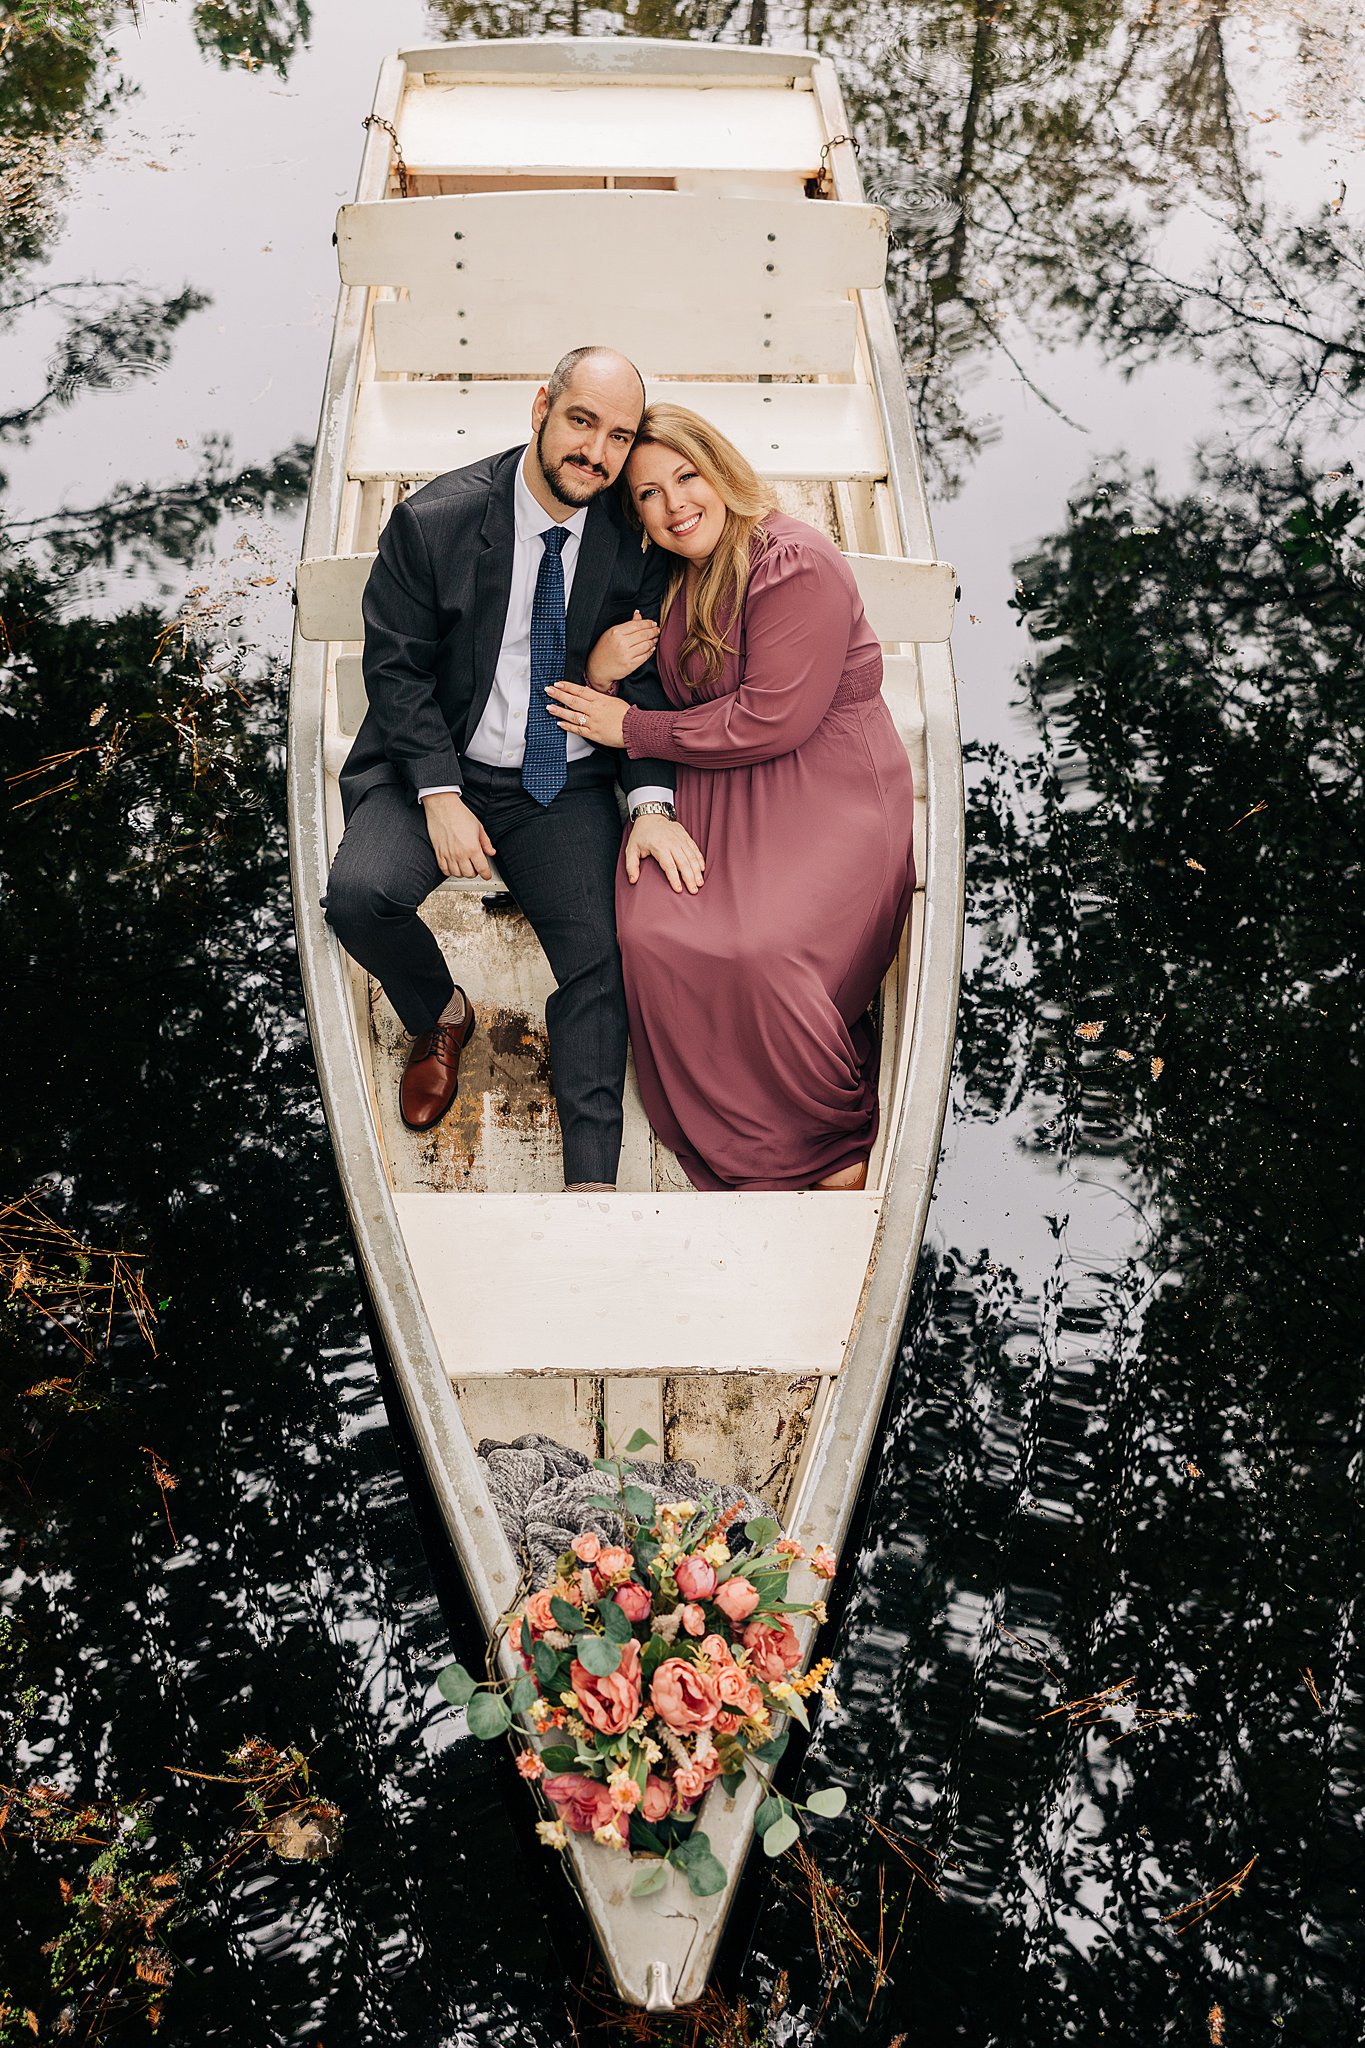 A view down onto a couple in a small boat during their cypress gardens wedding engagement